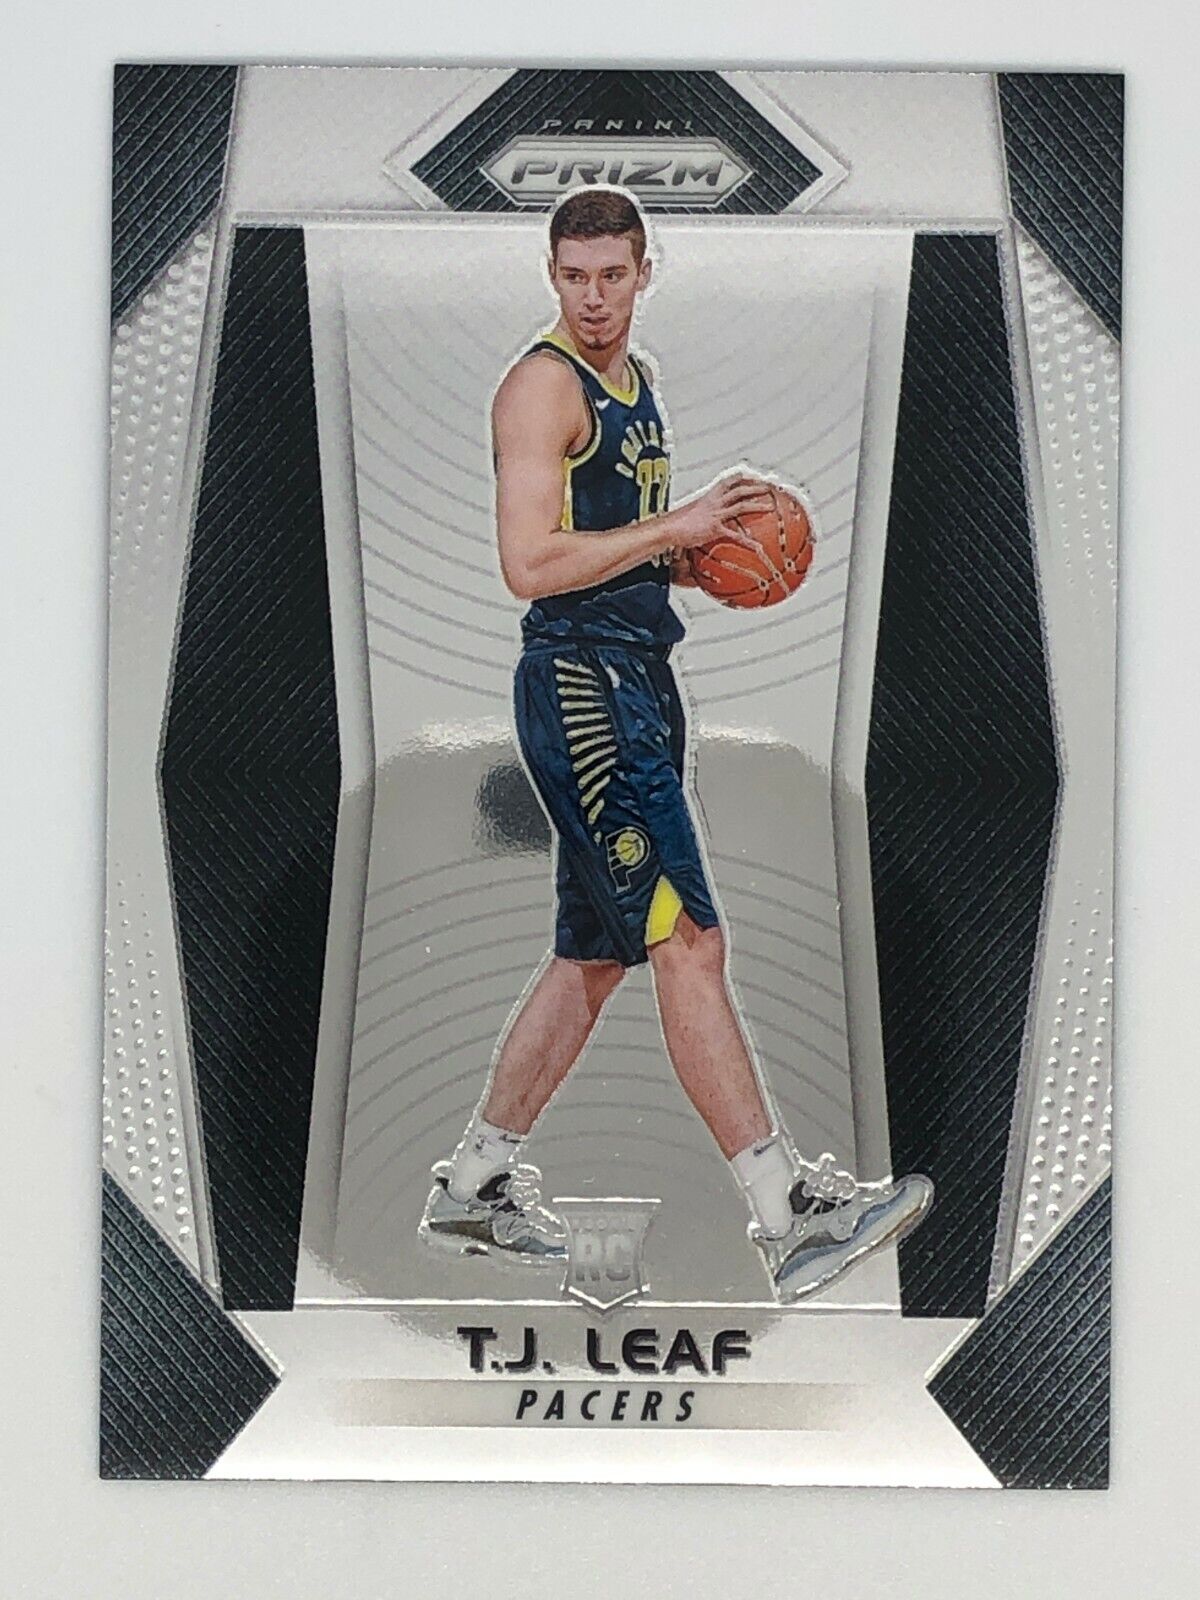 2017-18 Panini Prizm T.J. leaf RC #225 Indiana Pacers